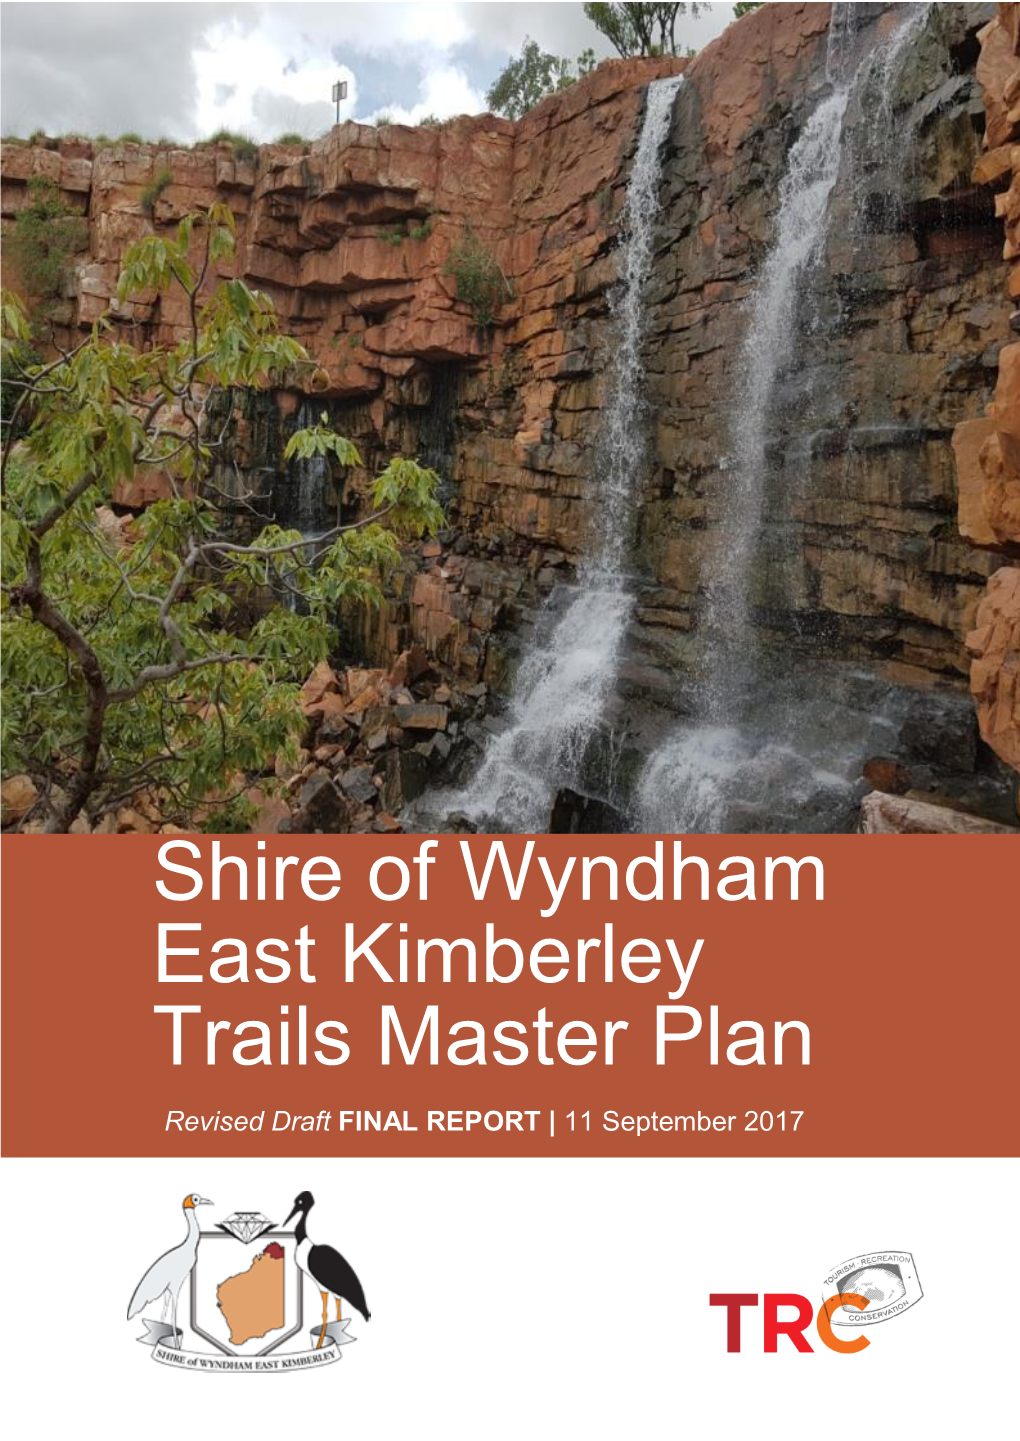 Shire of Wyndham East Kimberley Trails Master Plan